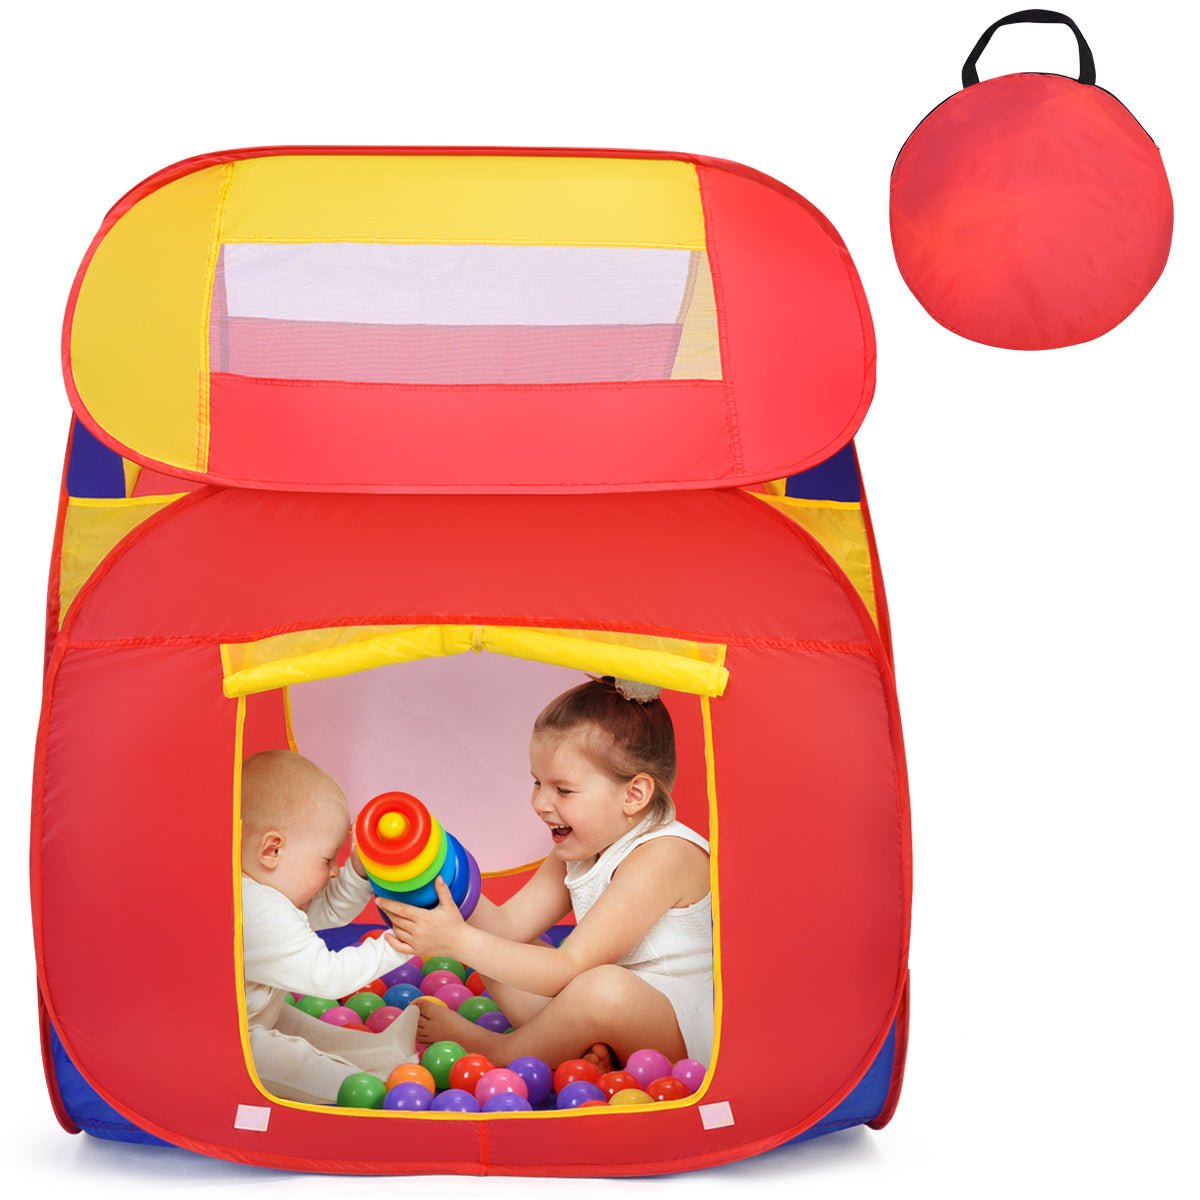 Wholesome Fun: Baby Play House with 100 Balls for Developmental Play